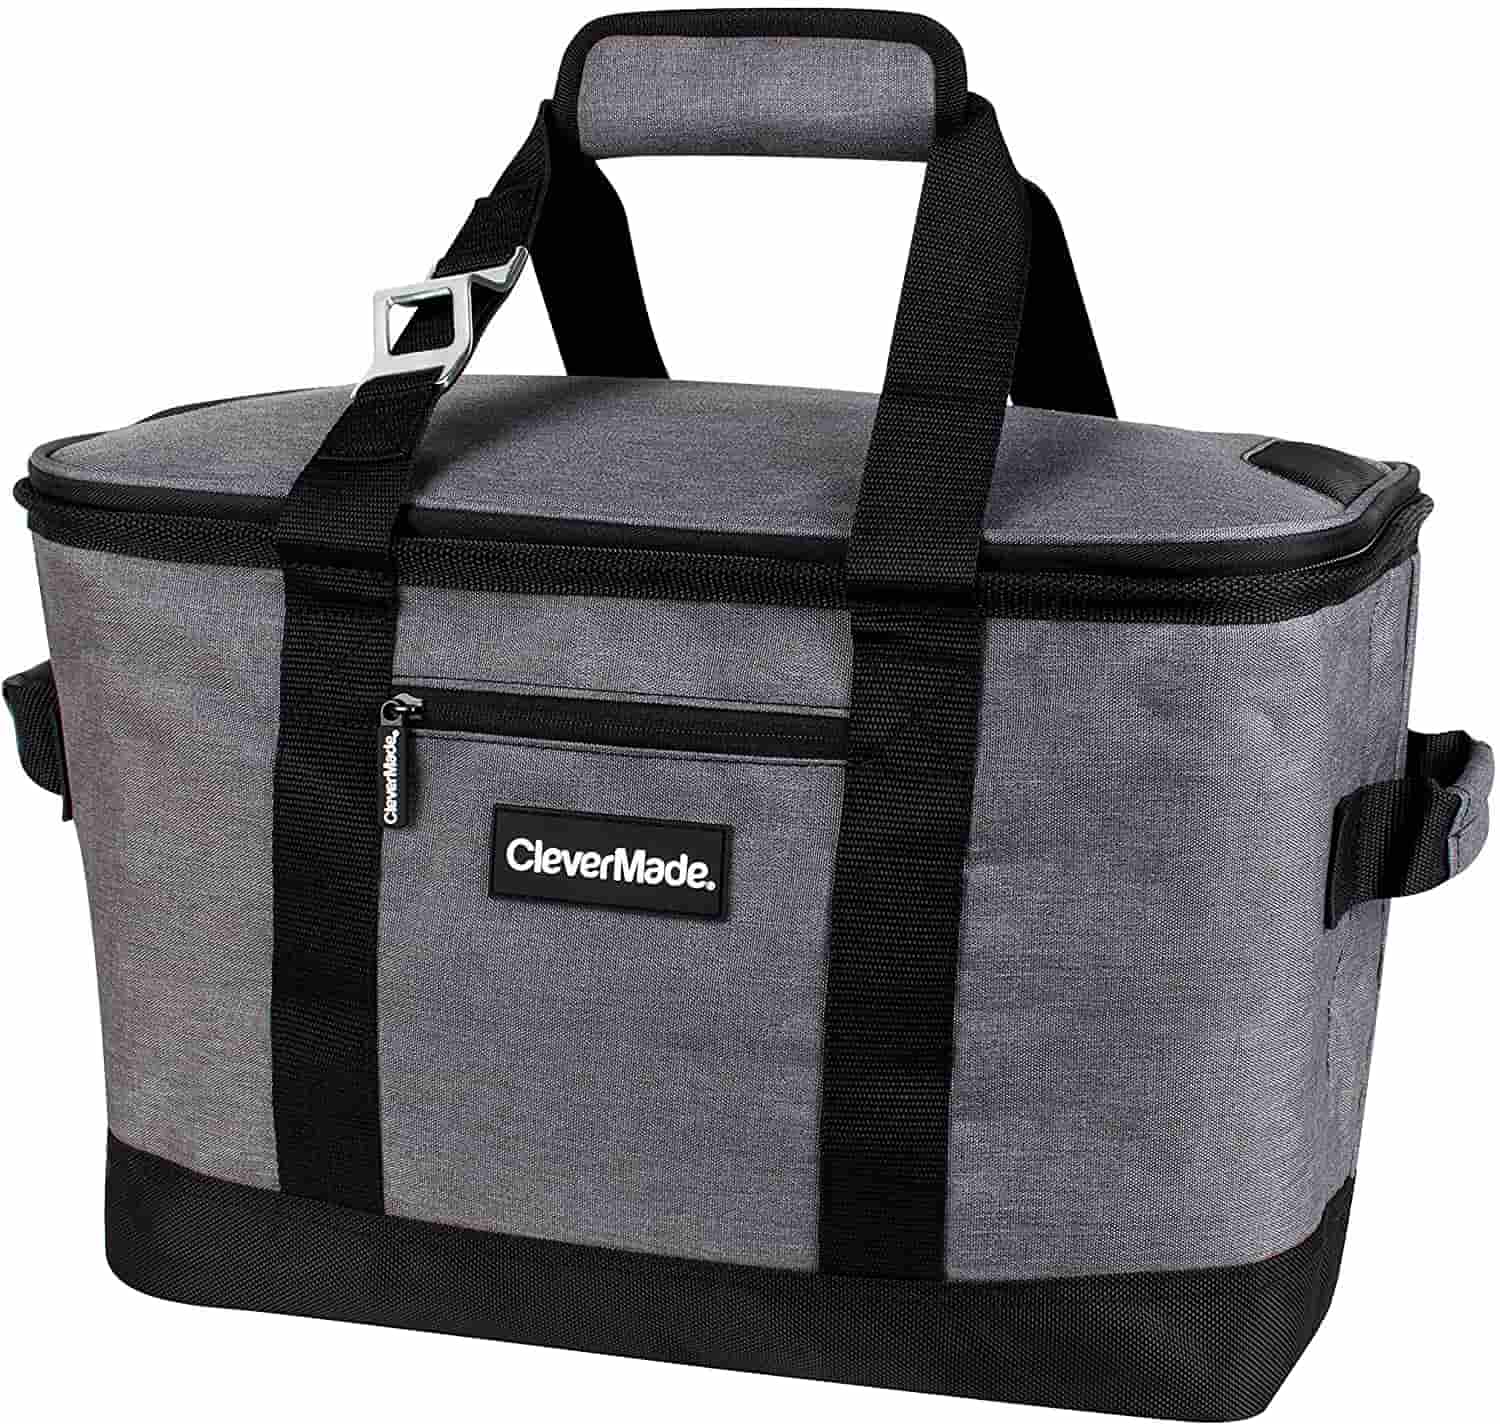 CleverMade Collapsible Cooler Bag For Beach